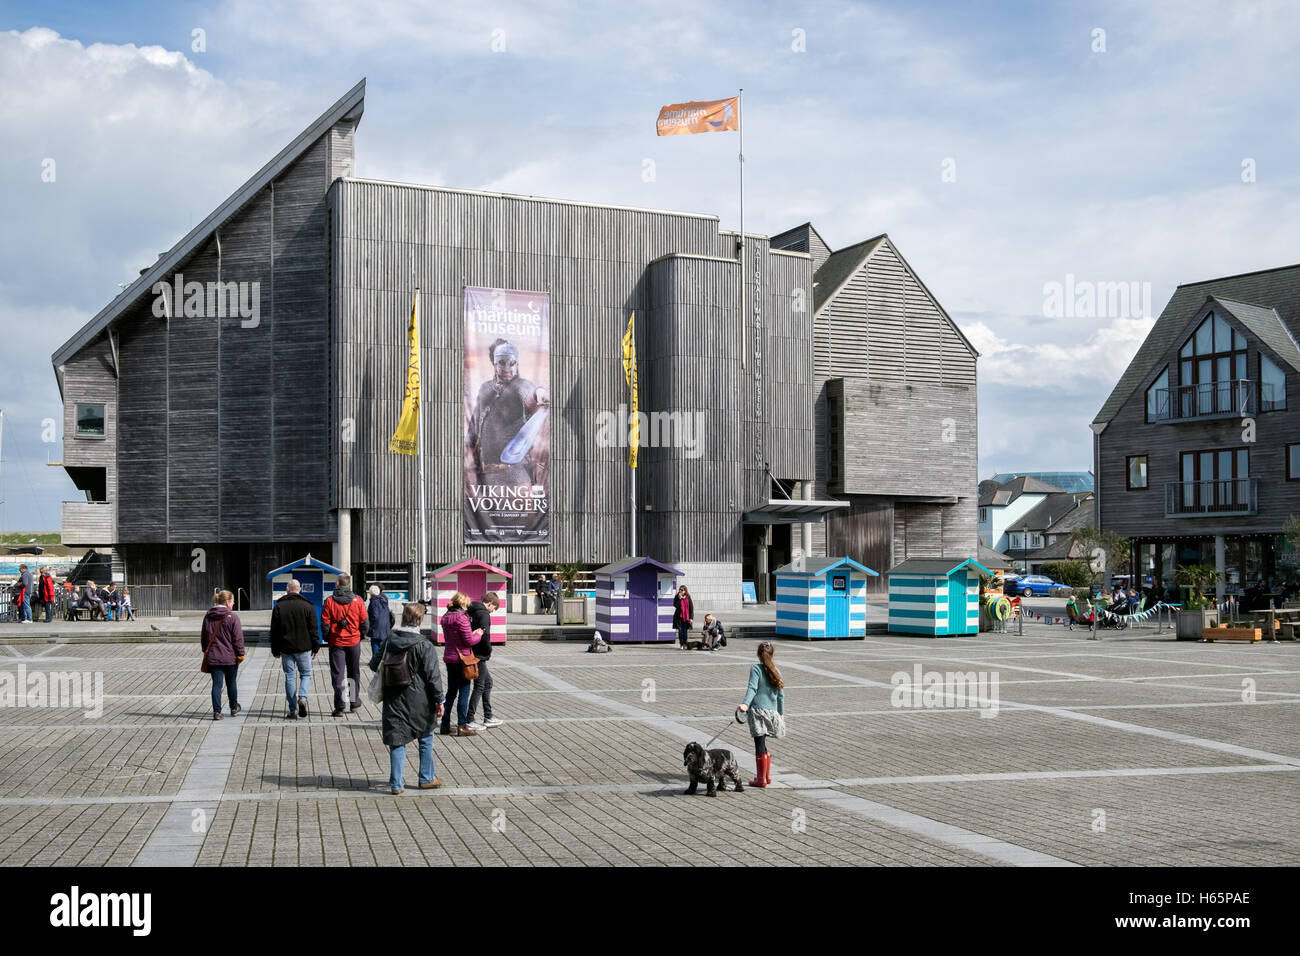 Das National Maritime Museum am Discovery Quay in Falmouth, Cornwall, England, UK an einem sonnigen Sommertag Stockfoto